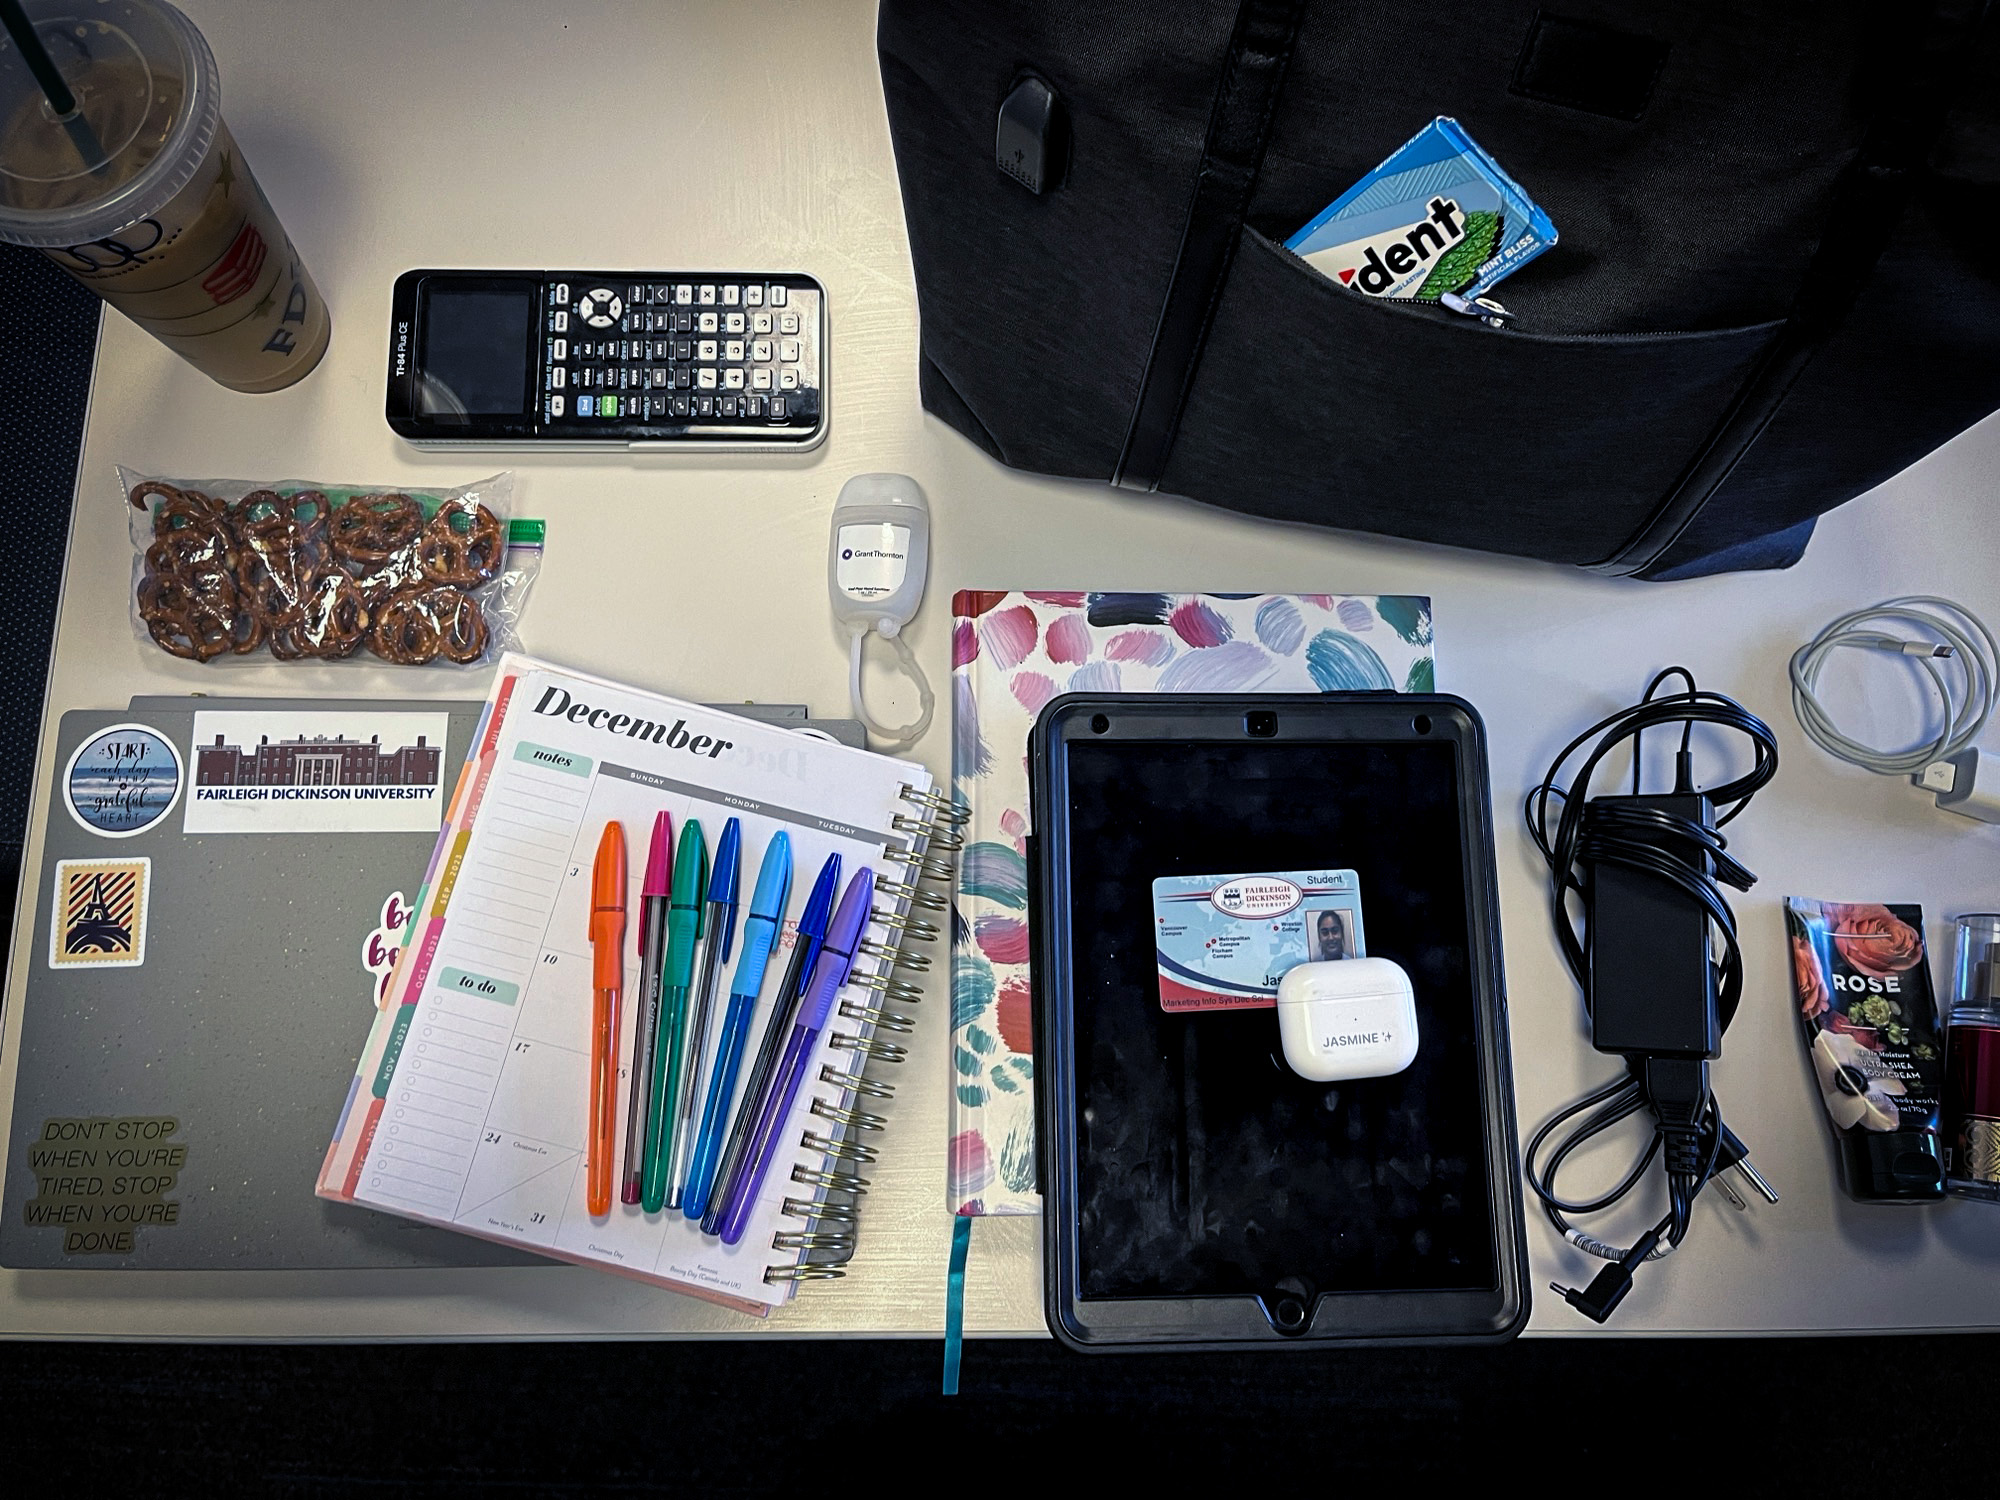 Colorful pens, a University ID, cords and chargers, a laptop, snacks, a calculator and a pack of gum sit atop a desk.